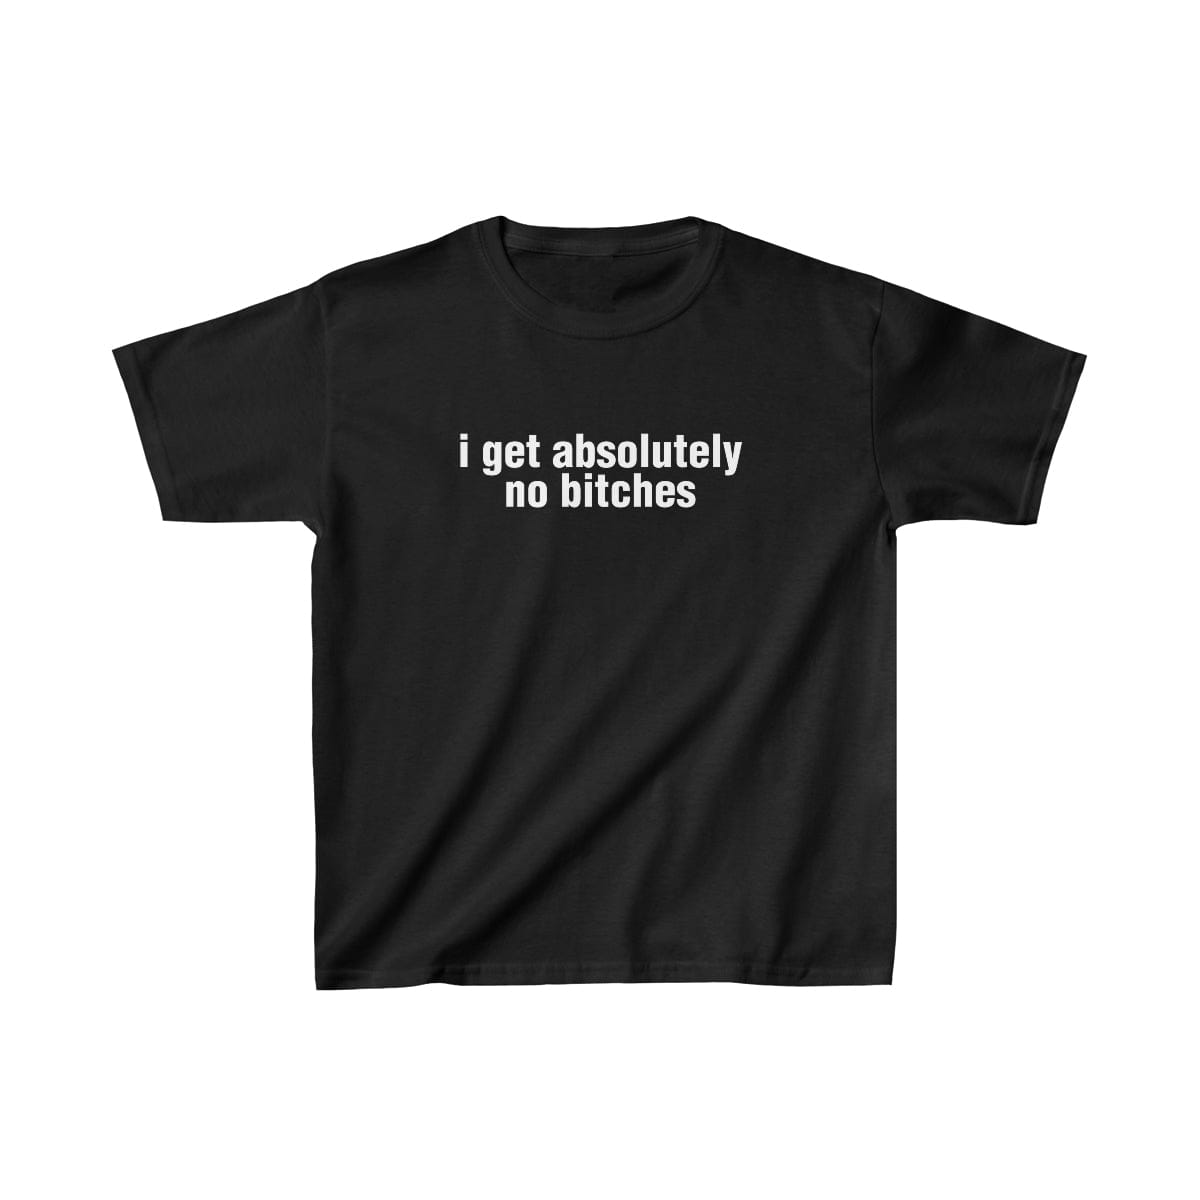 i get absolutely no bitches (baby tee)